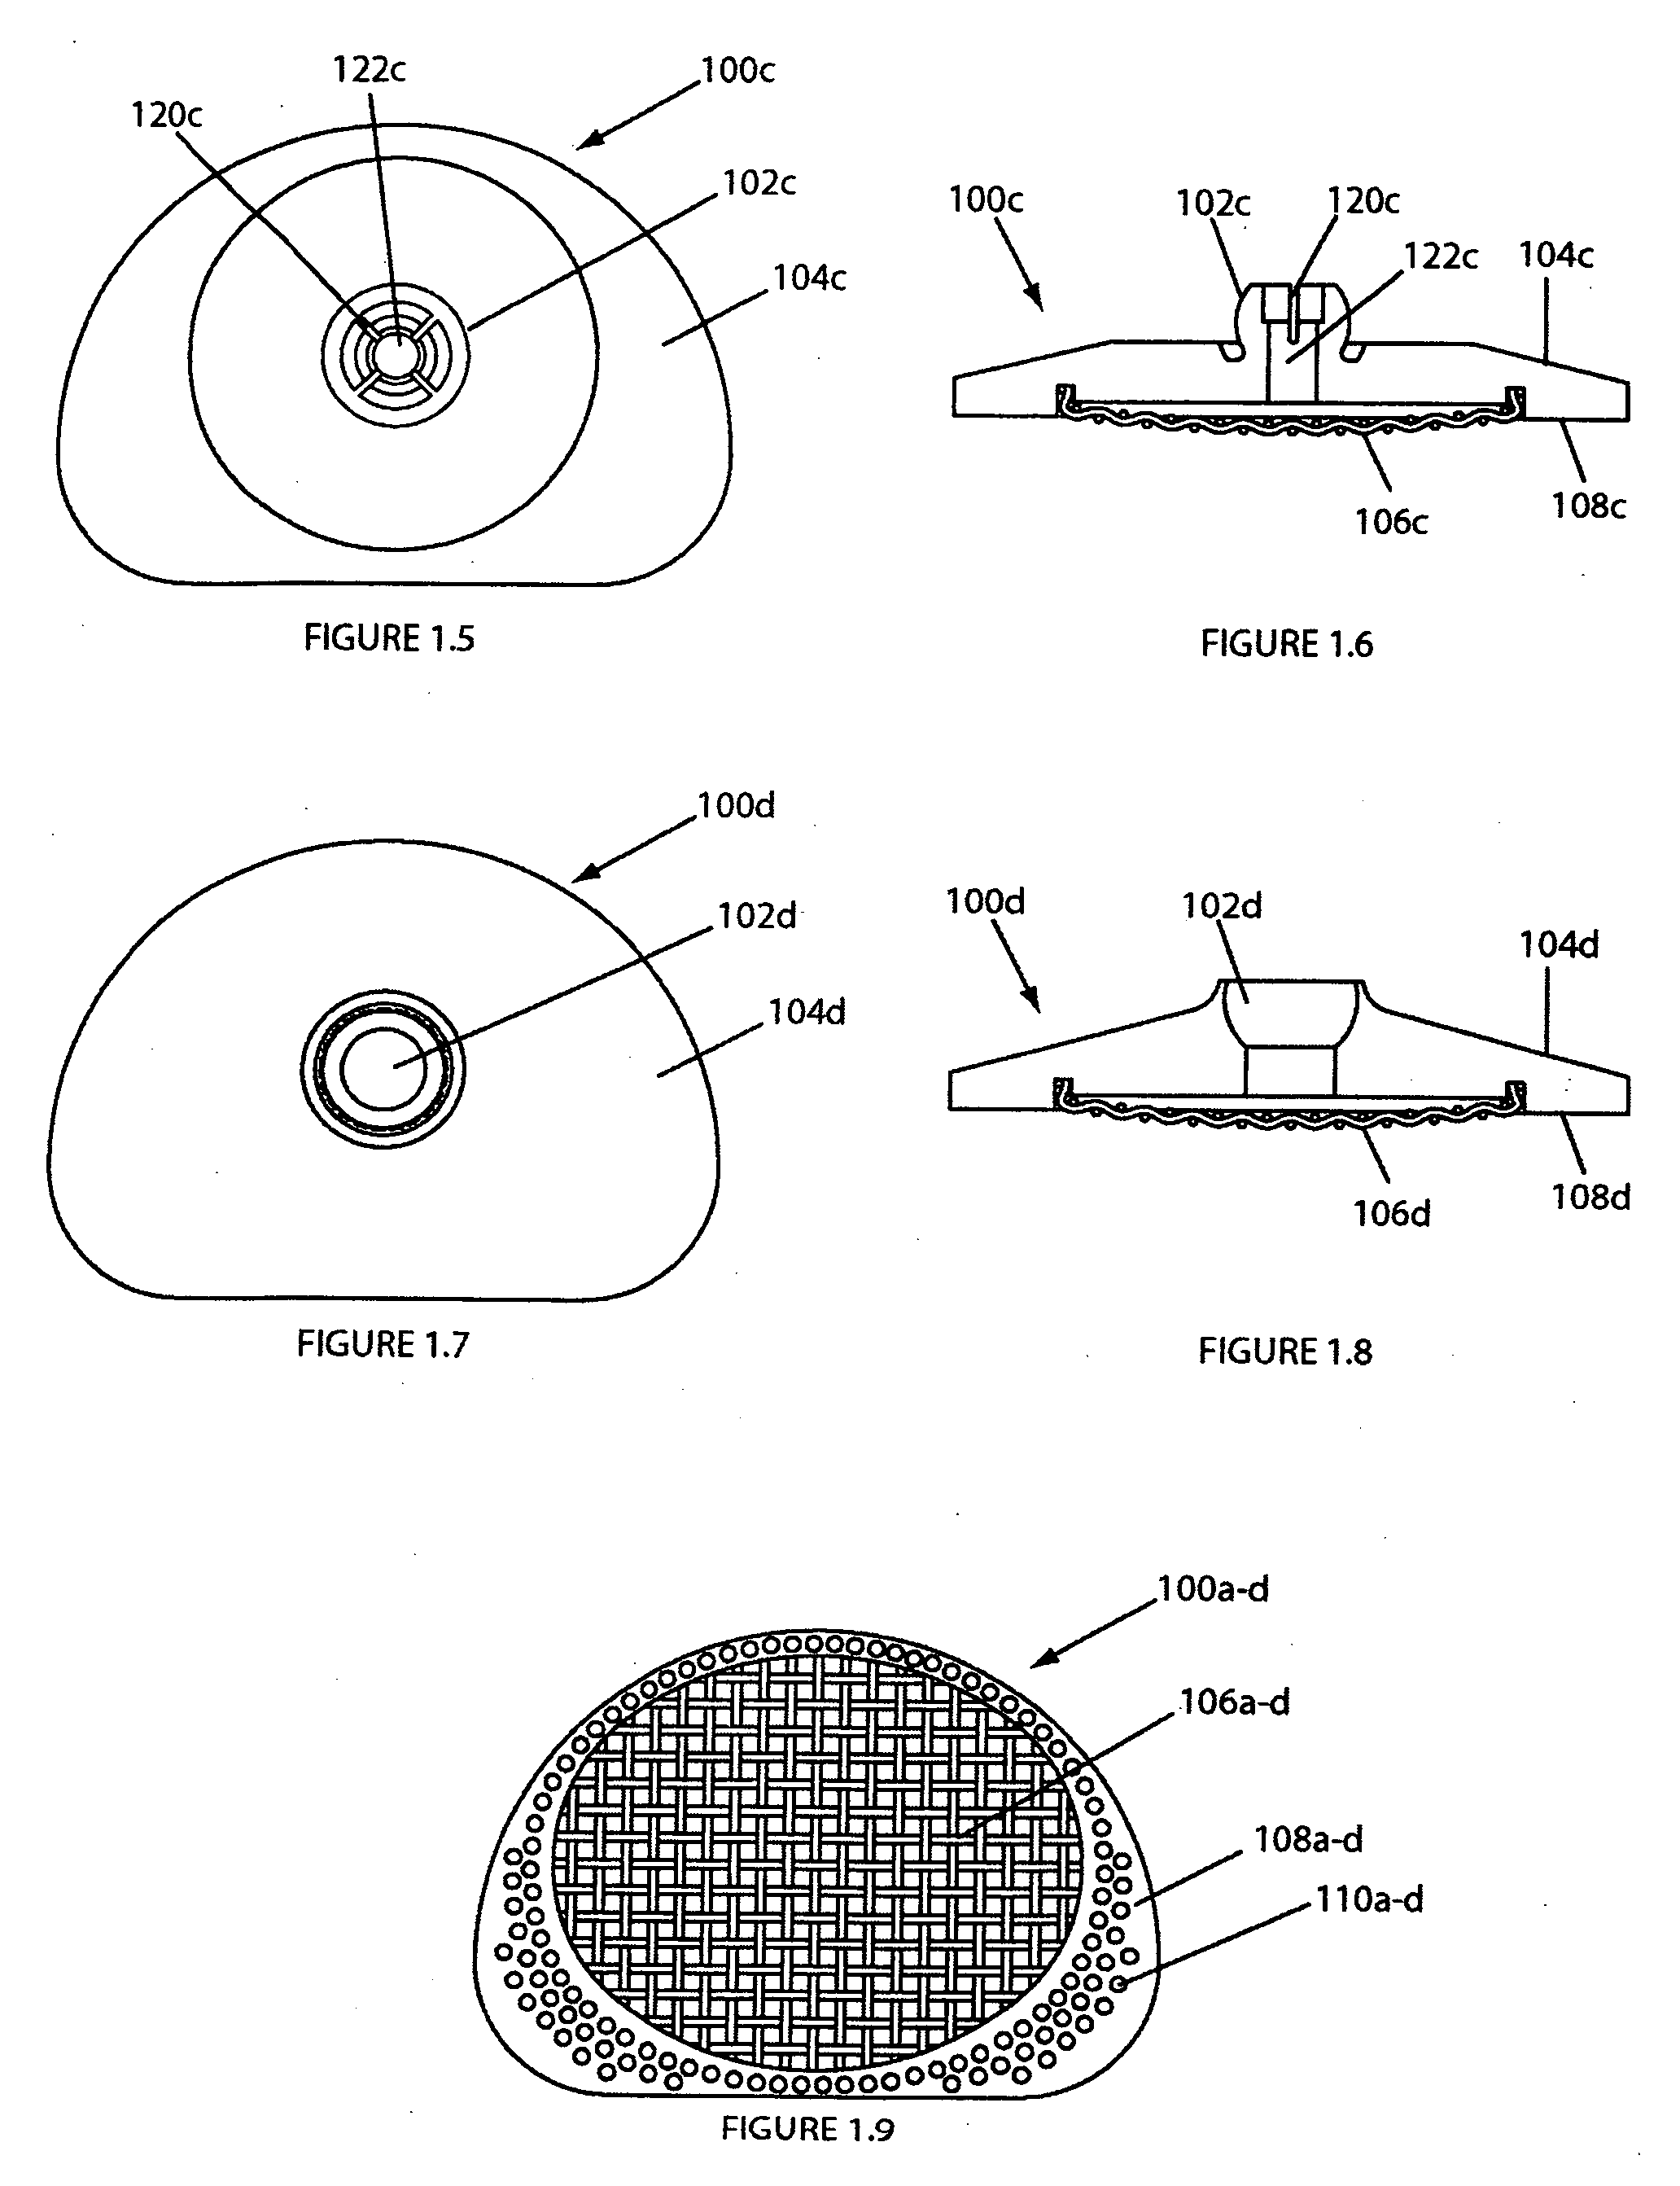 Intervertebral implant having features for controlling angulation thereof